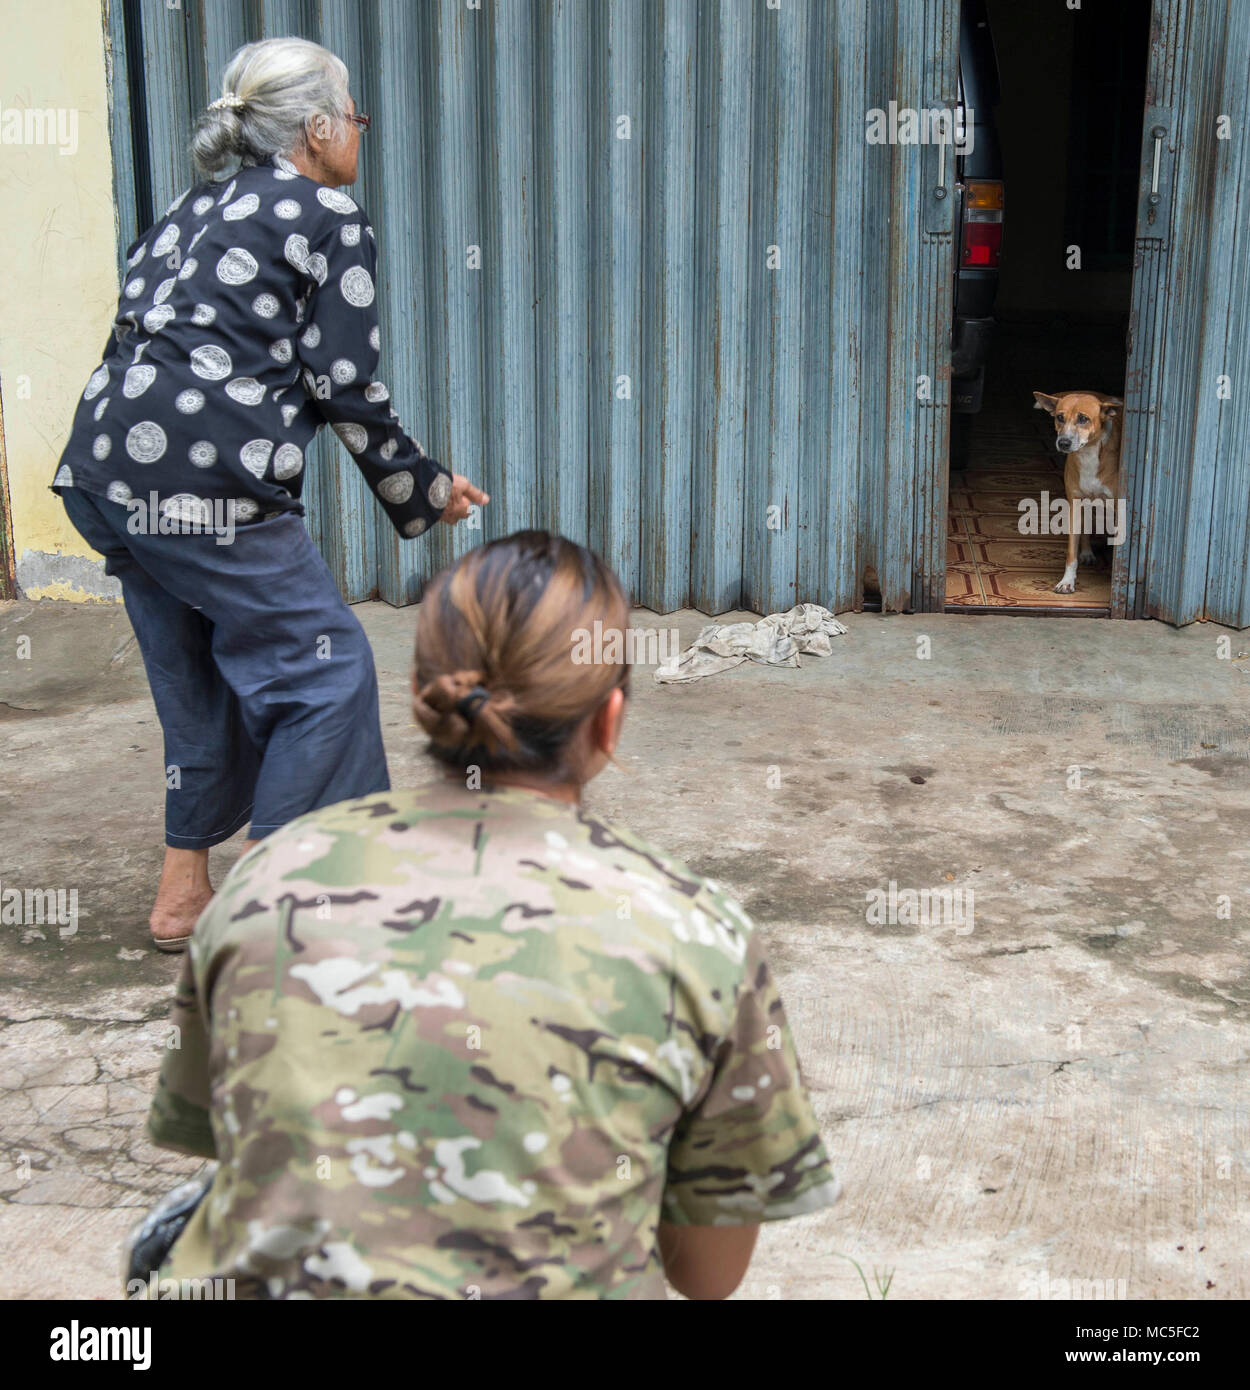 180404-N-MD713-0022  BENGKULU, Indonesia (April 4, 2018) Army Spc. Toni Weaver (center), from Castroville, Texas, and a local resident attempt to retrieve a stray dog during a rabies vaccination event.  Service members assigned to Military Sealift Command hospital ship USNS Mercy (T-AH 19) are currently deployed in support of Pacific Partnership 2018 (PP18).  PP18’s mission is to work collectively with host and partner nations to enhance regional interoperability and disaster response capabilities, increase stability and security in the region, and foster new and enduring friendships across th Stock Photo